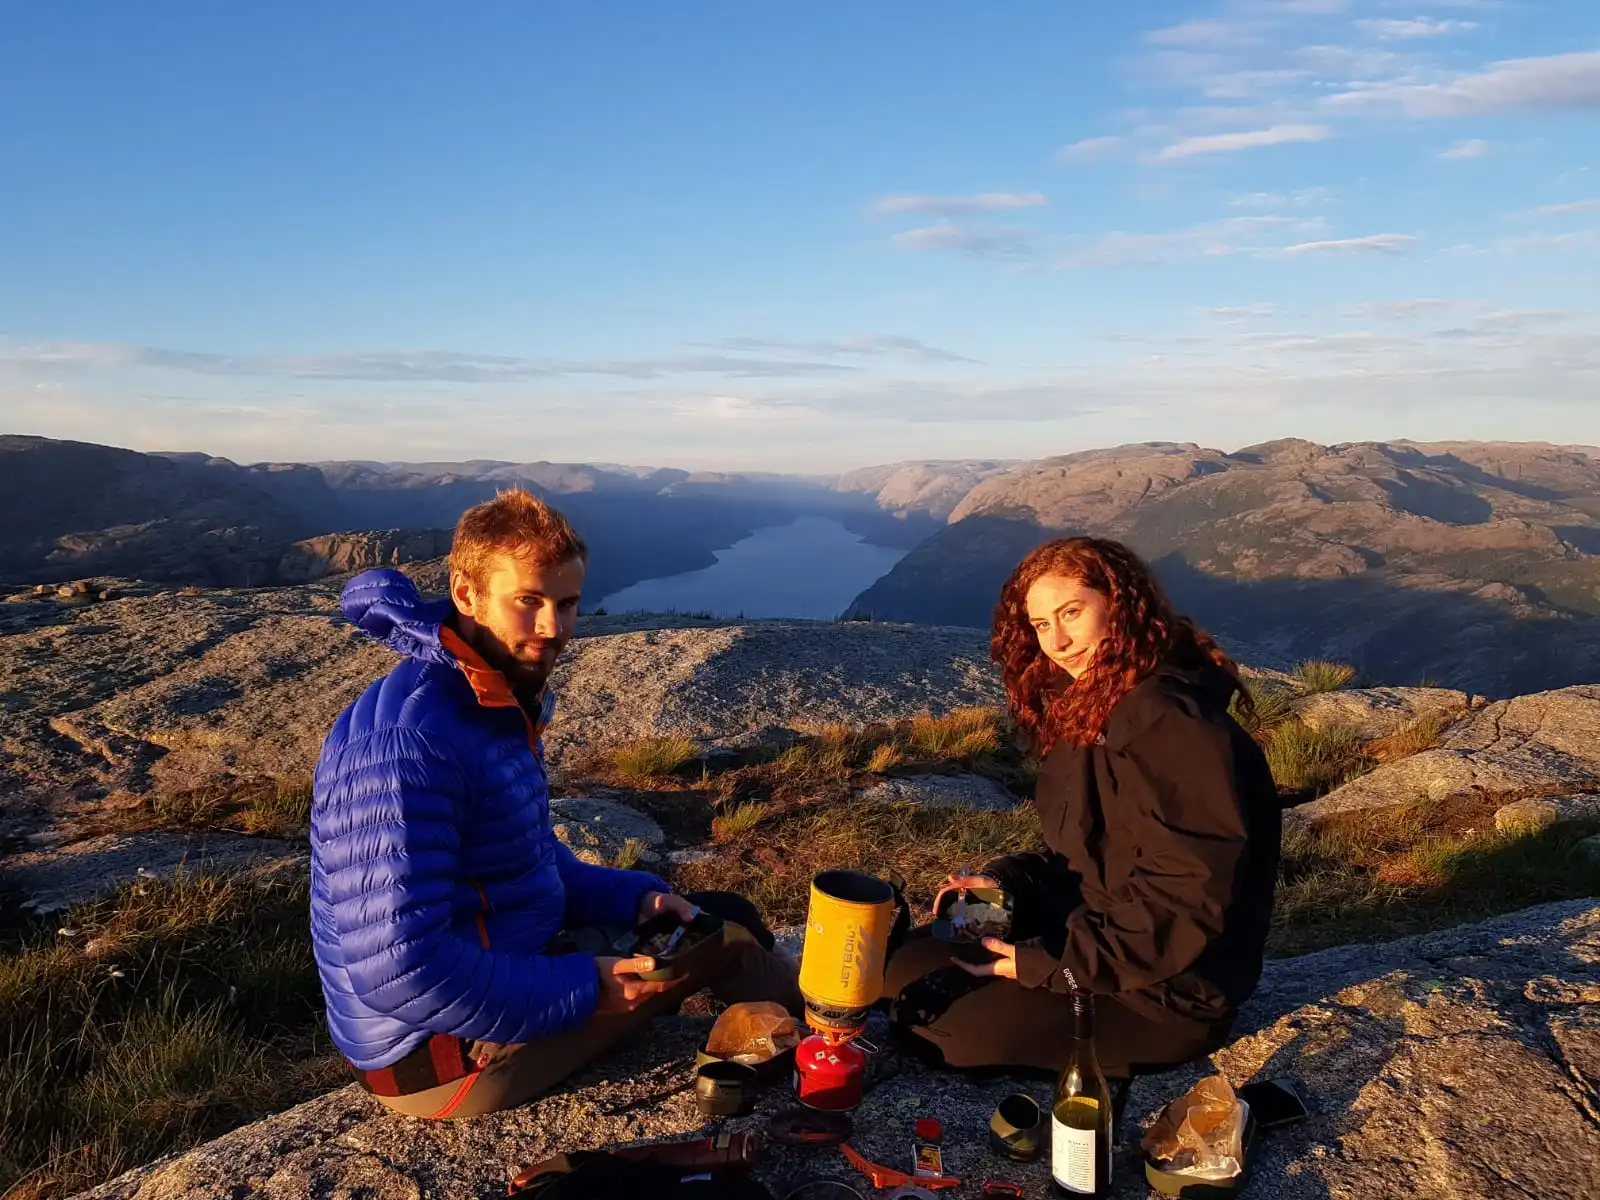 Barbara and Peder on a trip in Norway